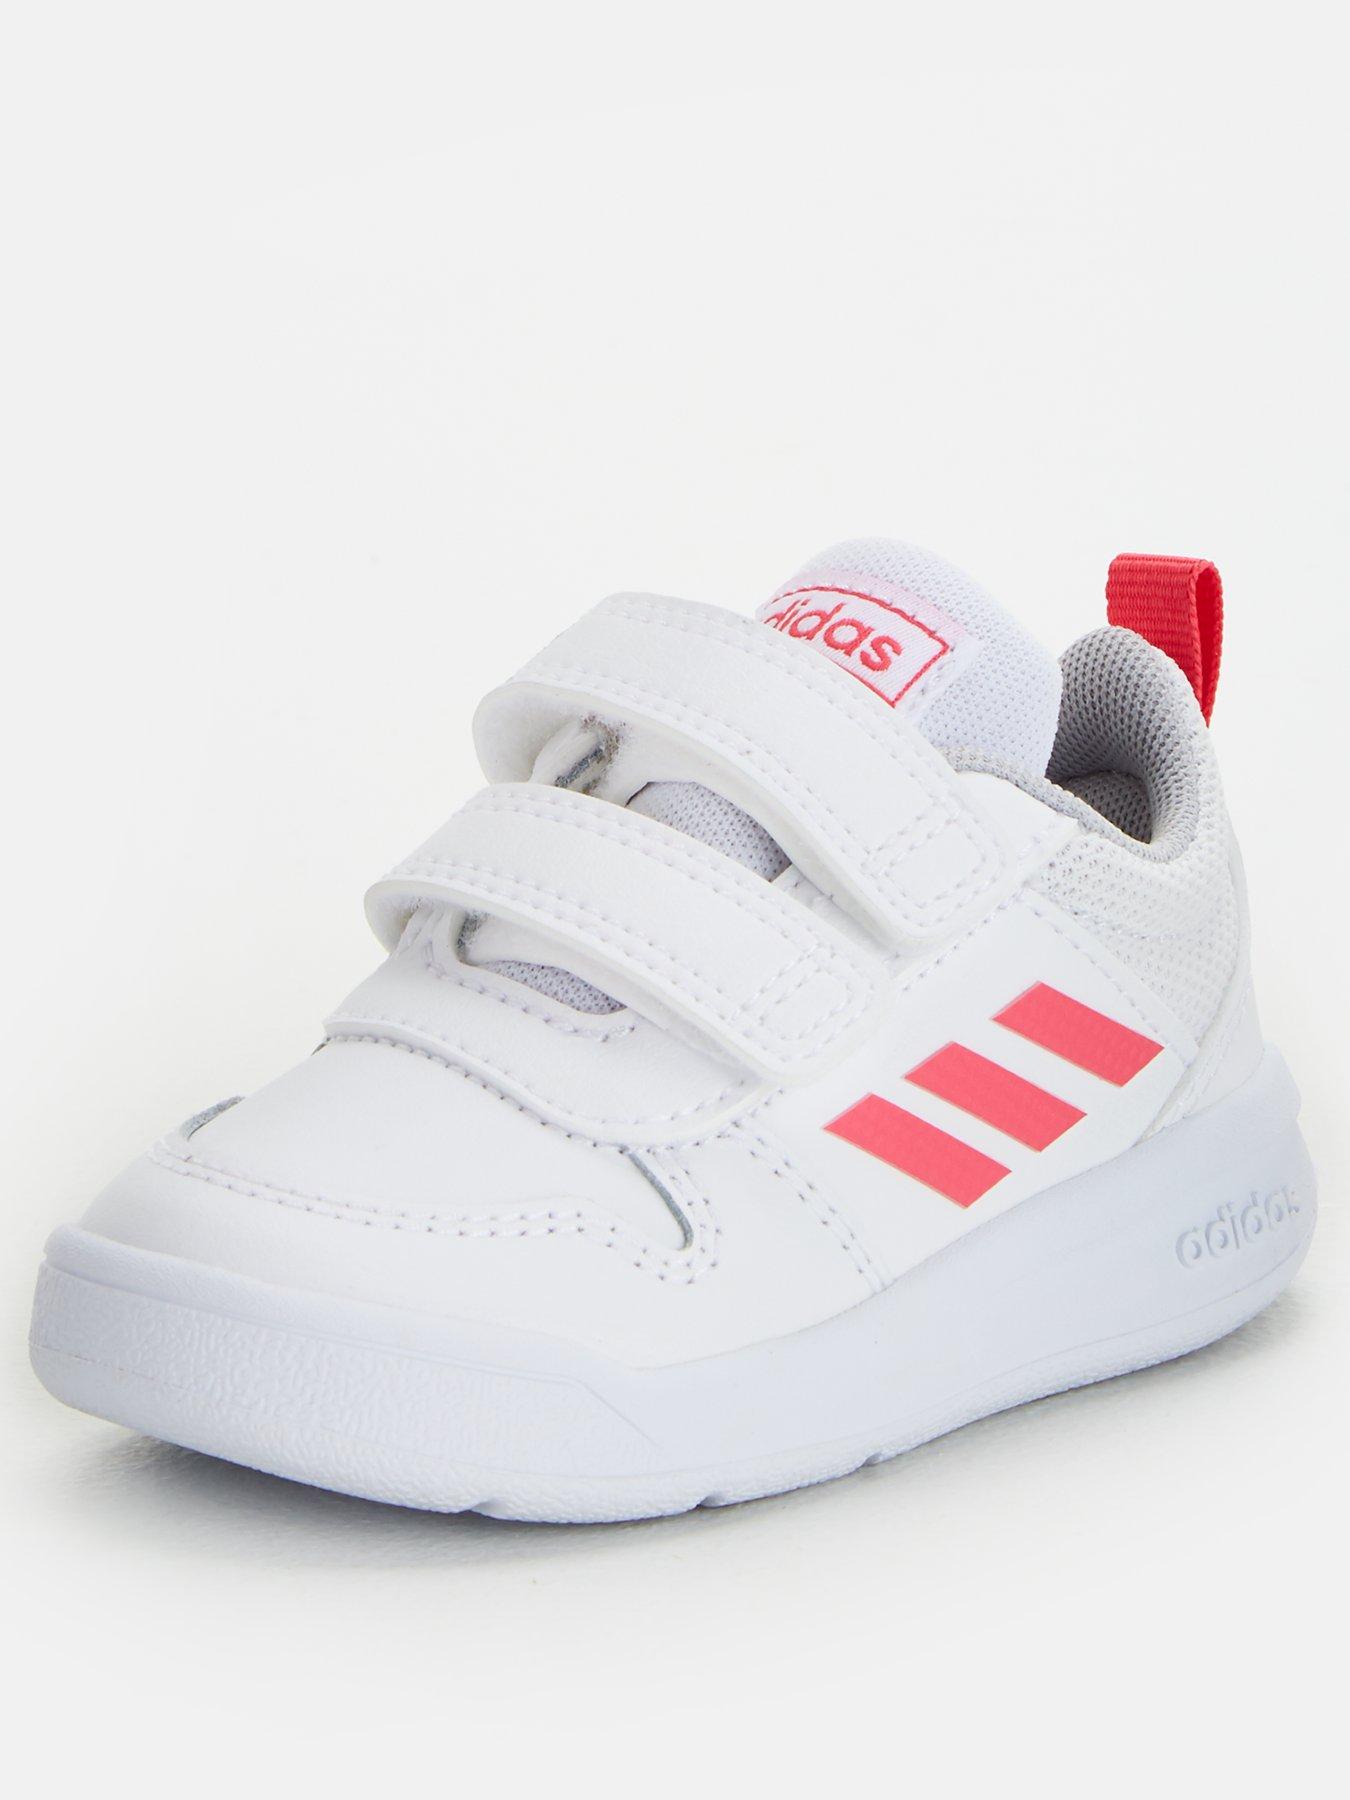 baby trainers size 4